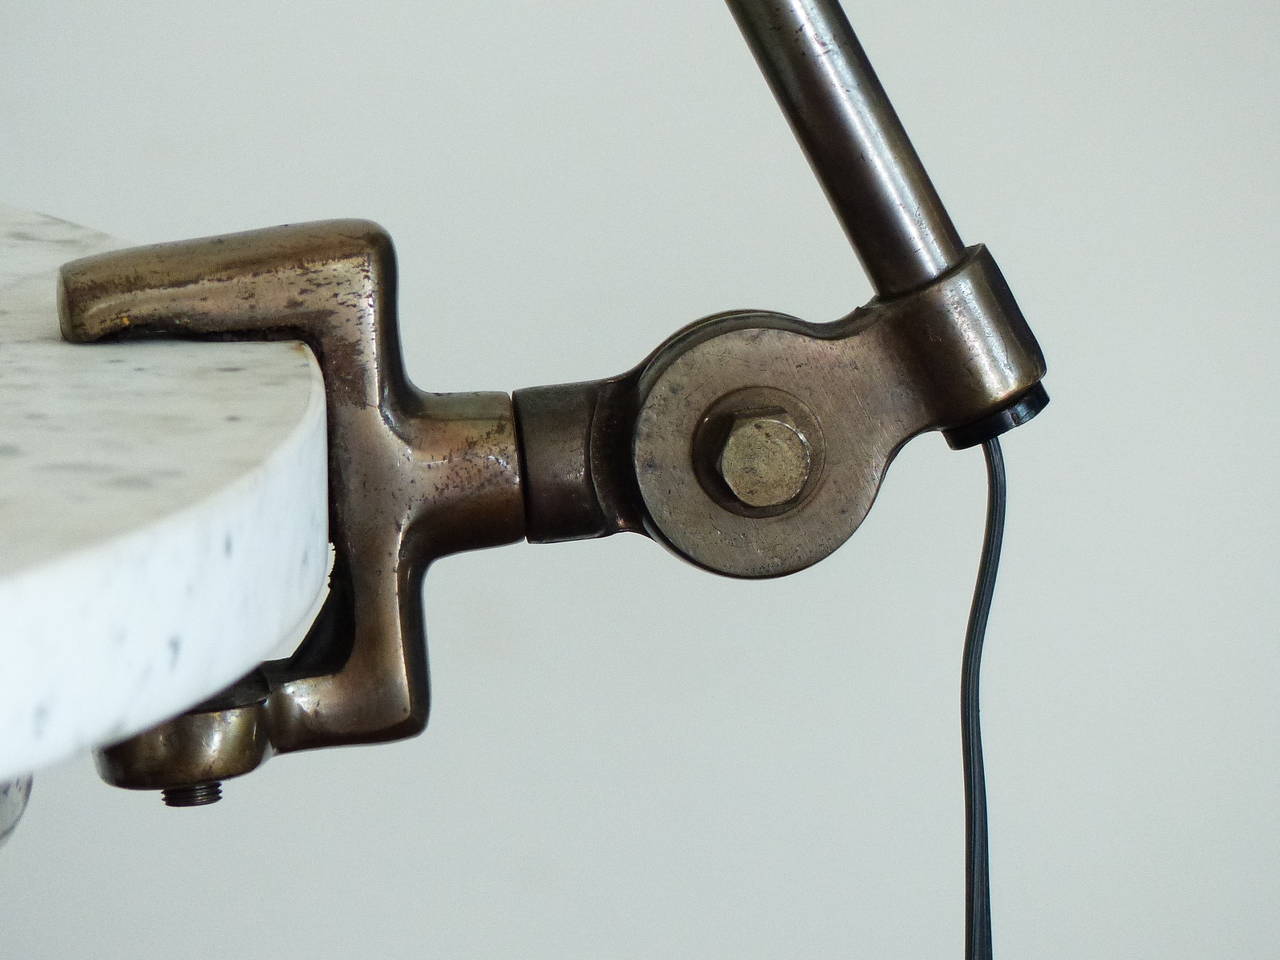 Clip-on Micron desk lamp with original deep patina. Re-wired and restored. Found in NYC